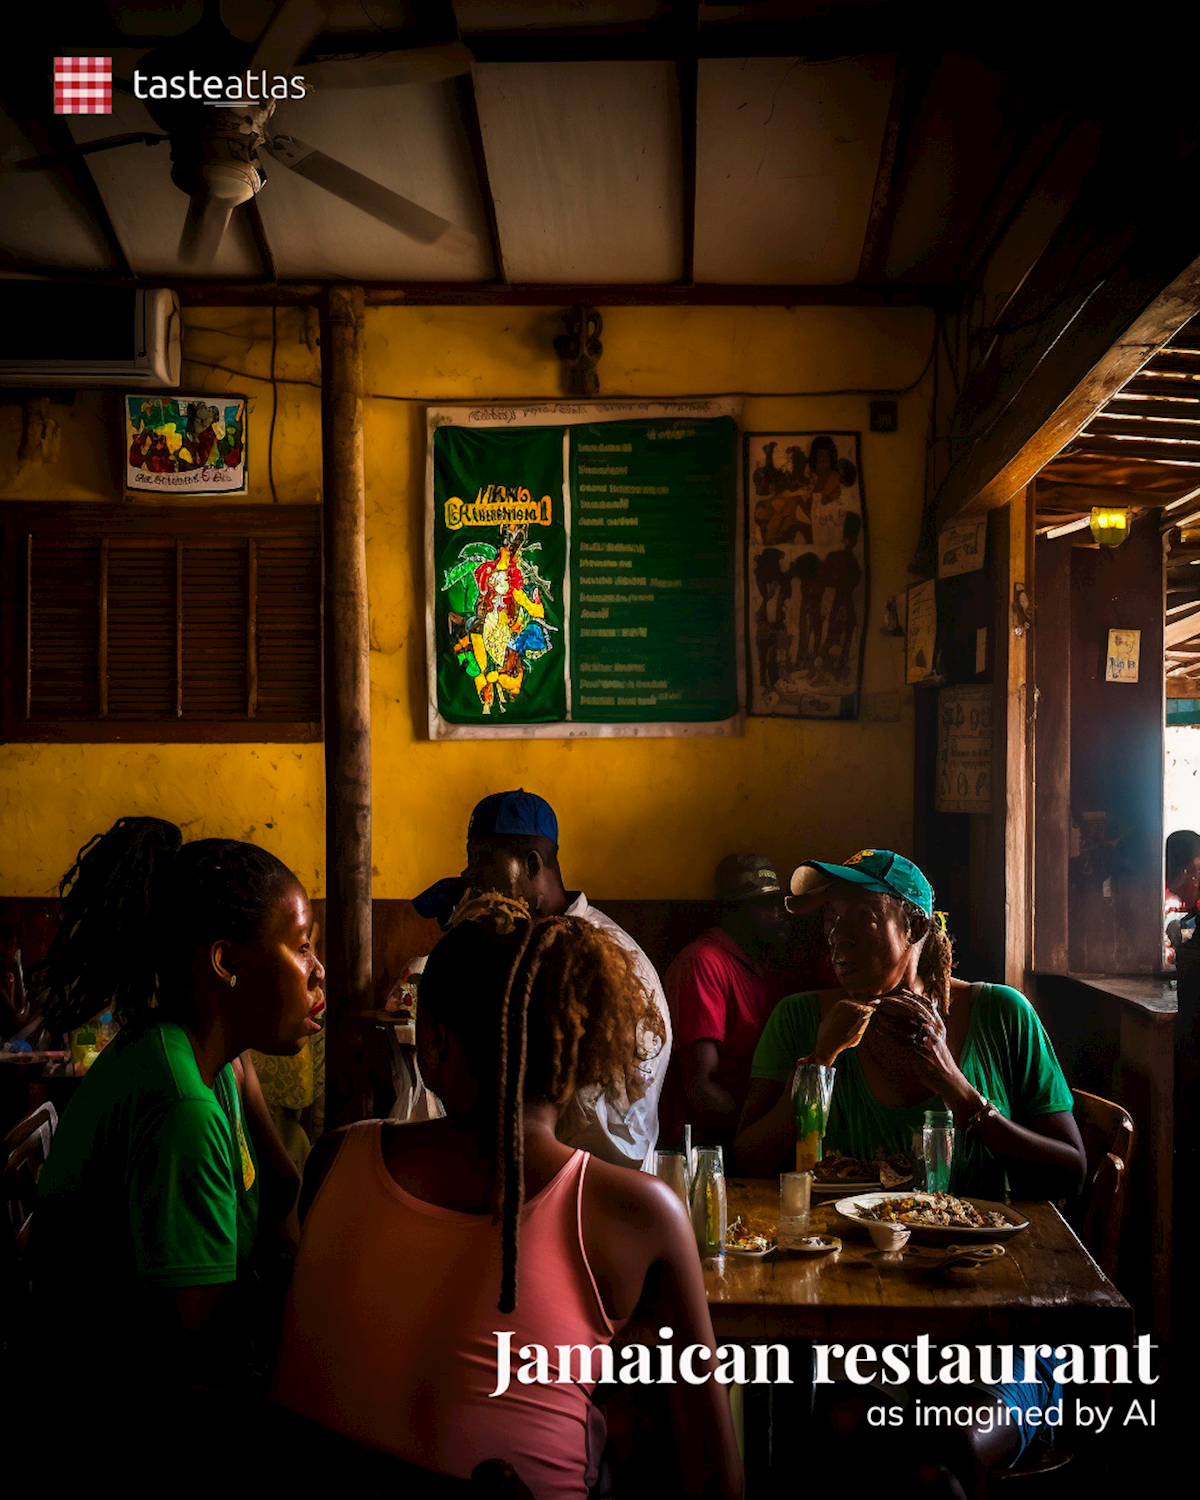 Prompt: Imagine locals eating in a traditional Jamaican restaurant